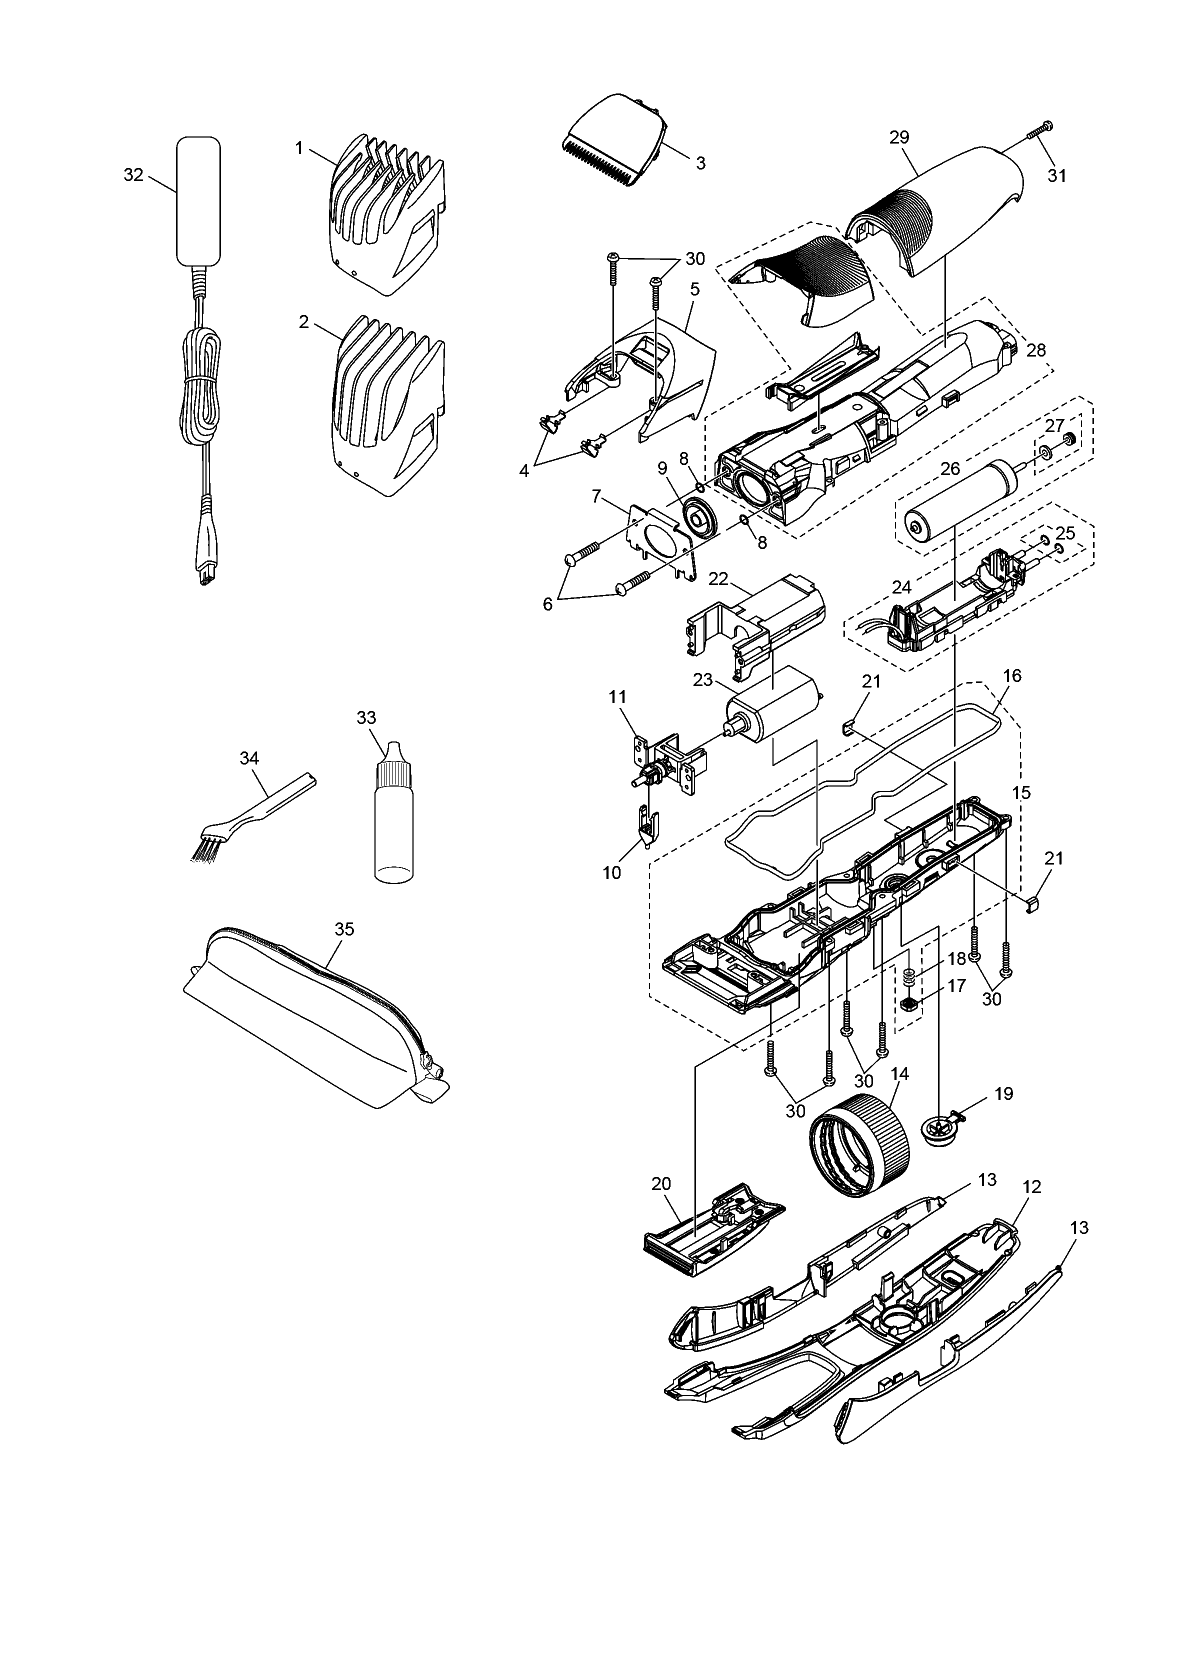 ER-GB70: Exploded View